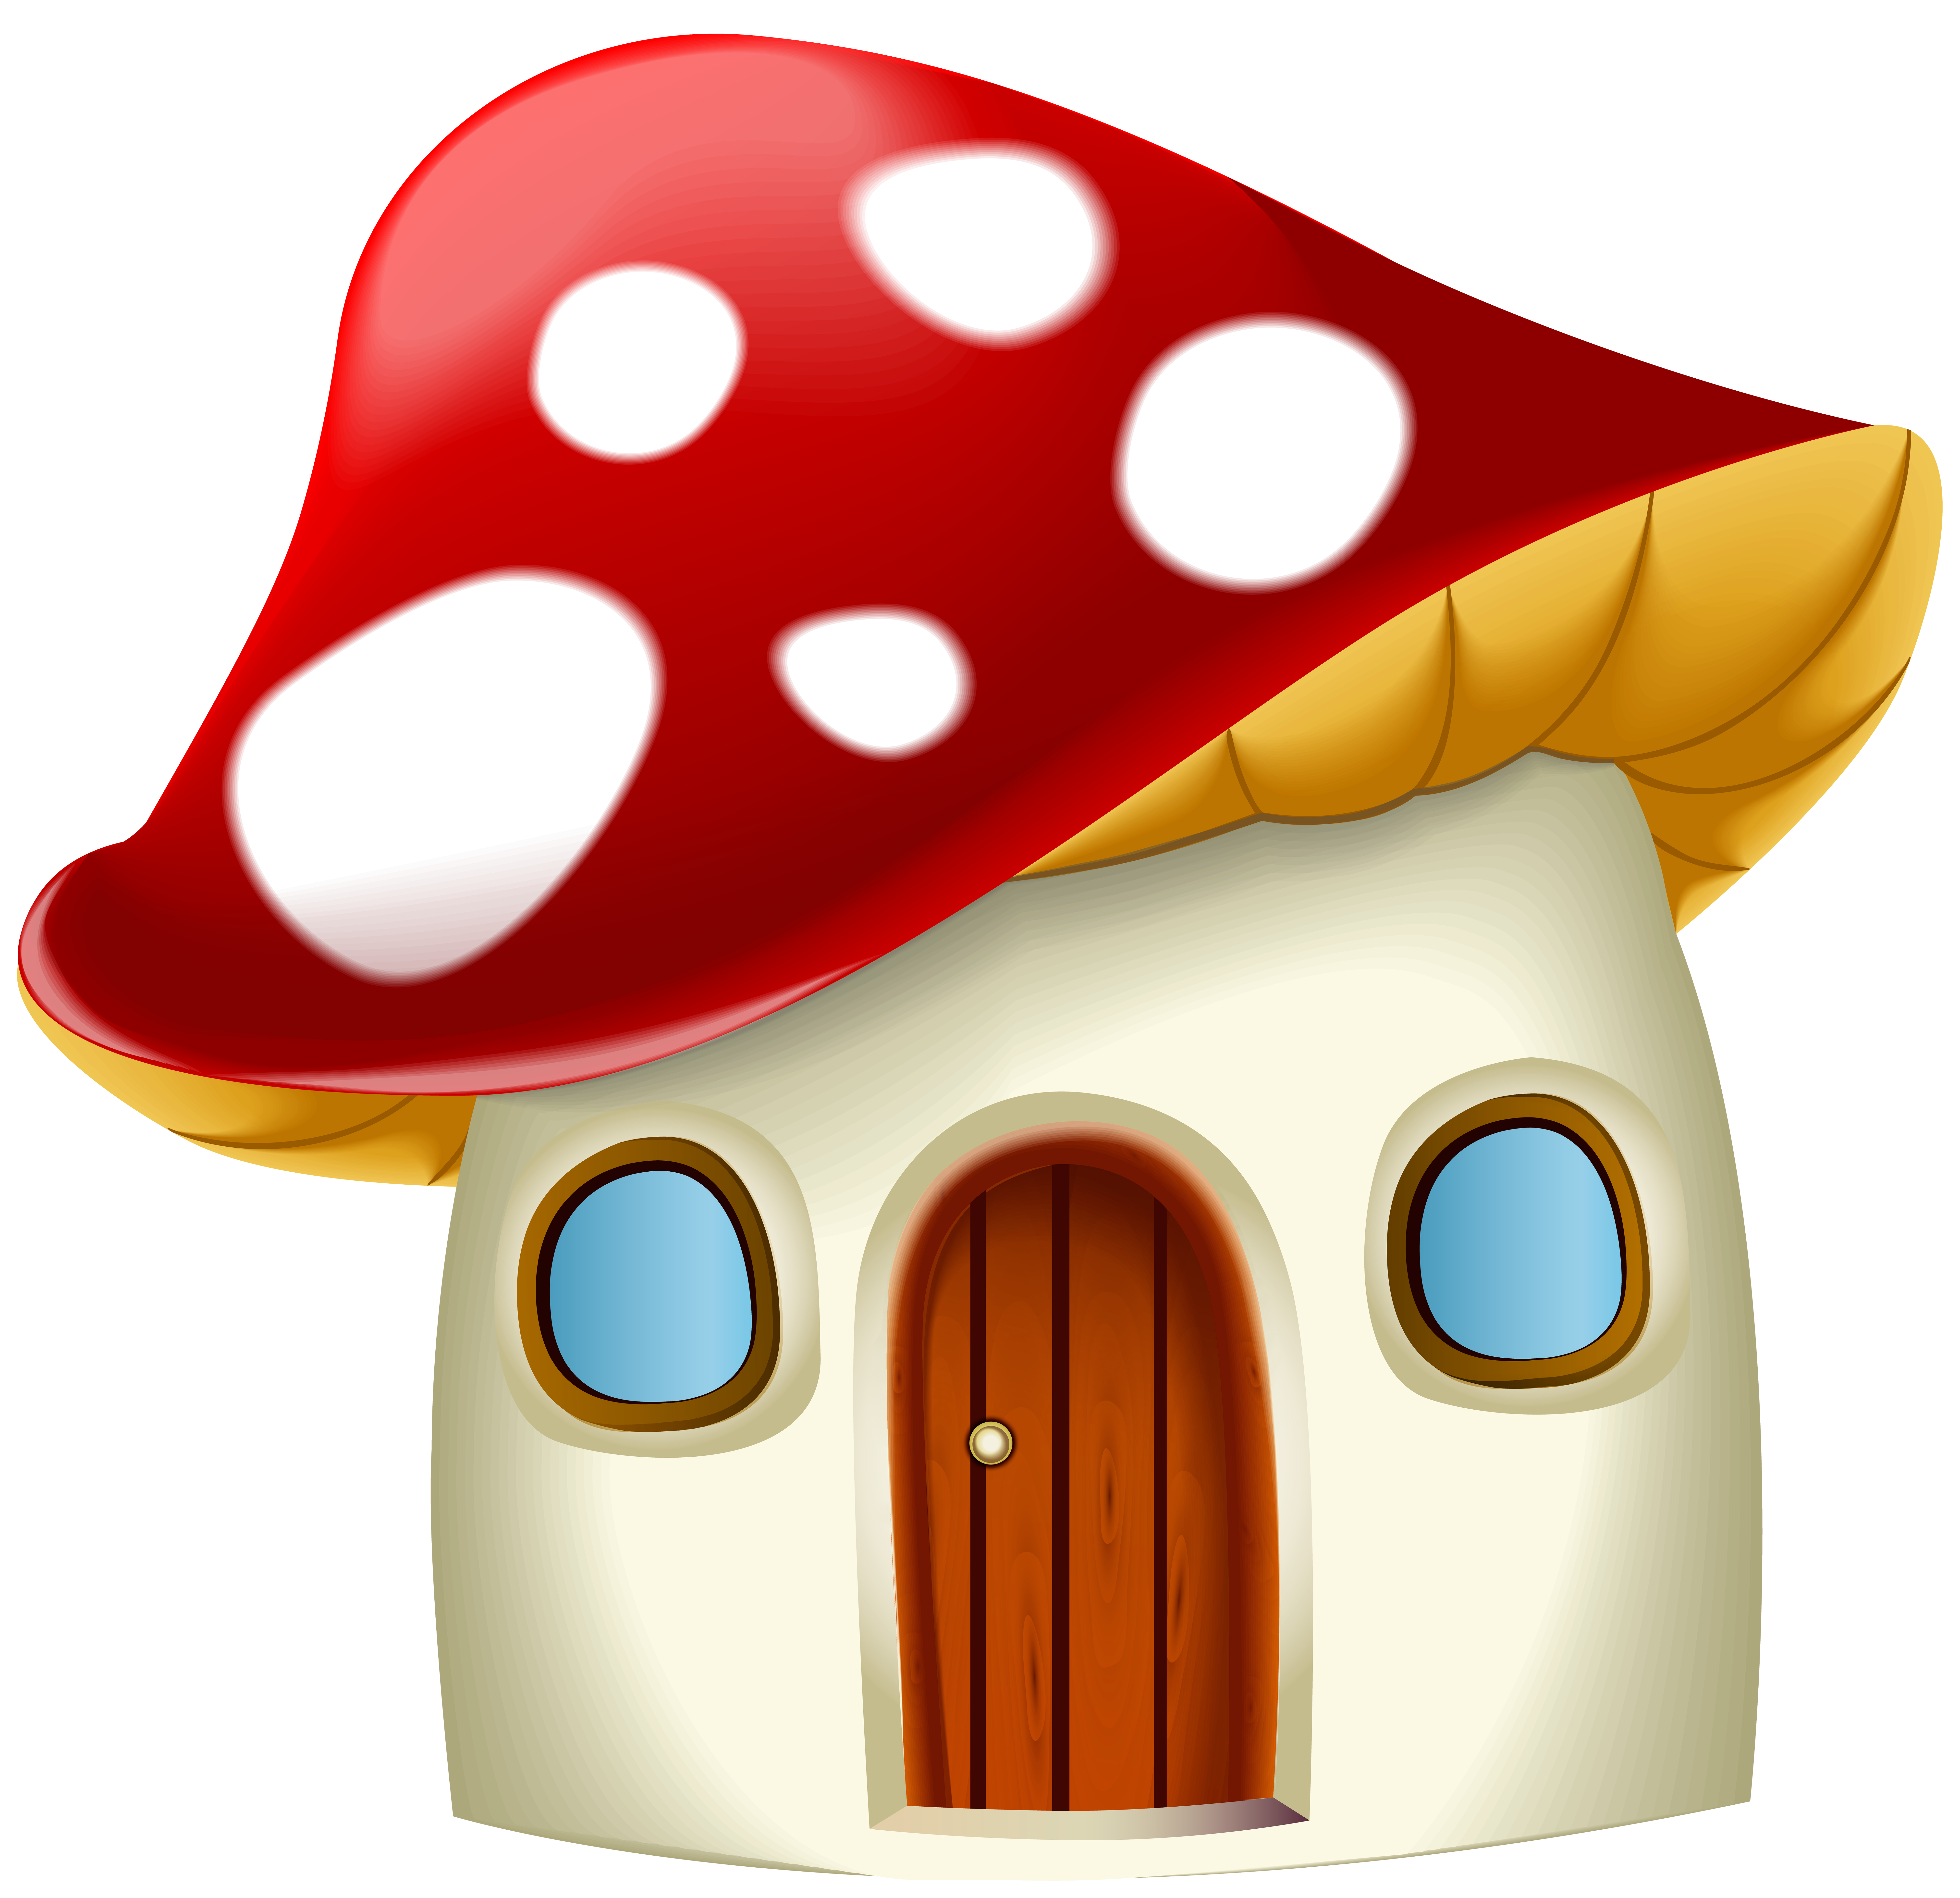 Mushroom House Cartoon Quality Image And Transparent PNG Free Clipart